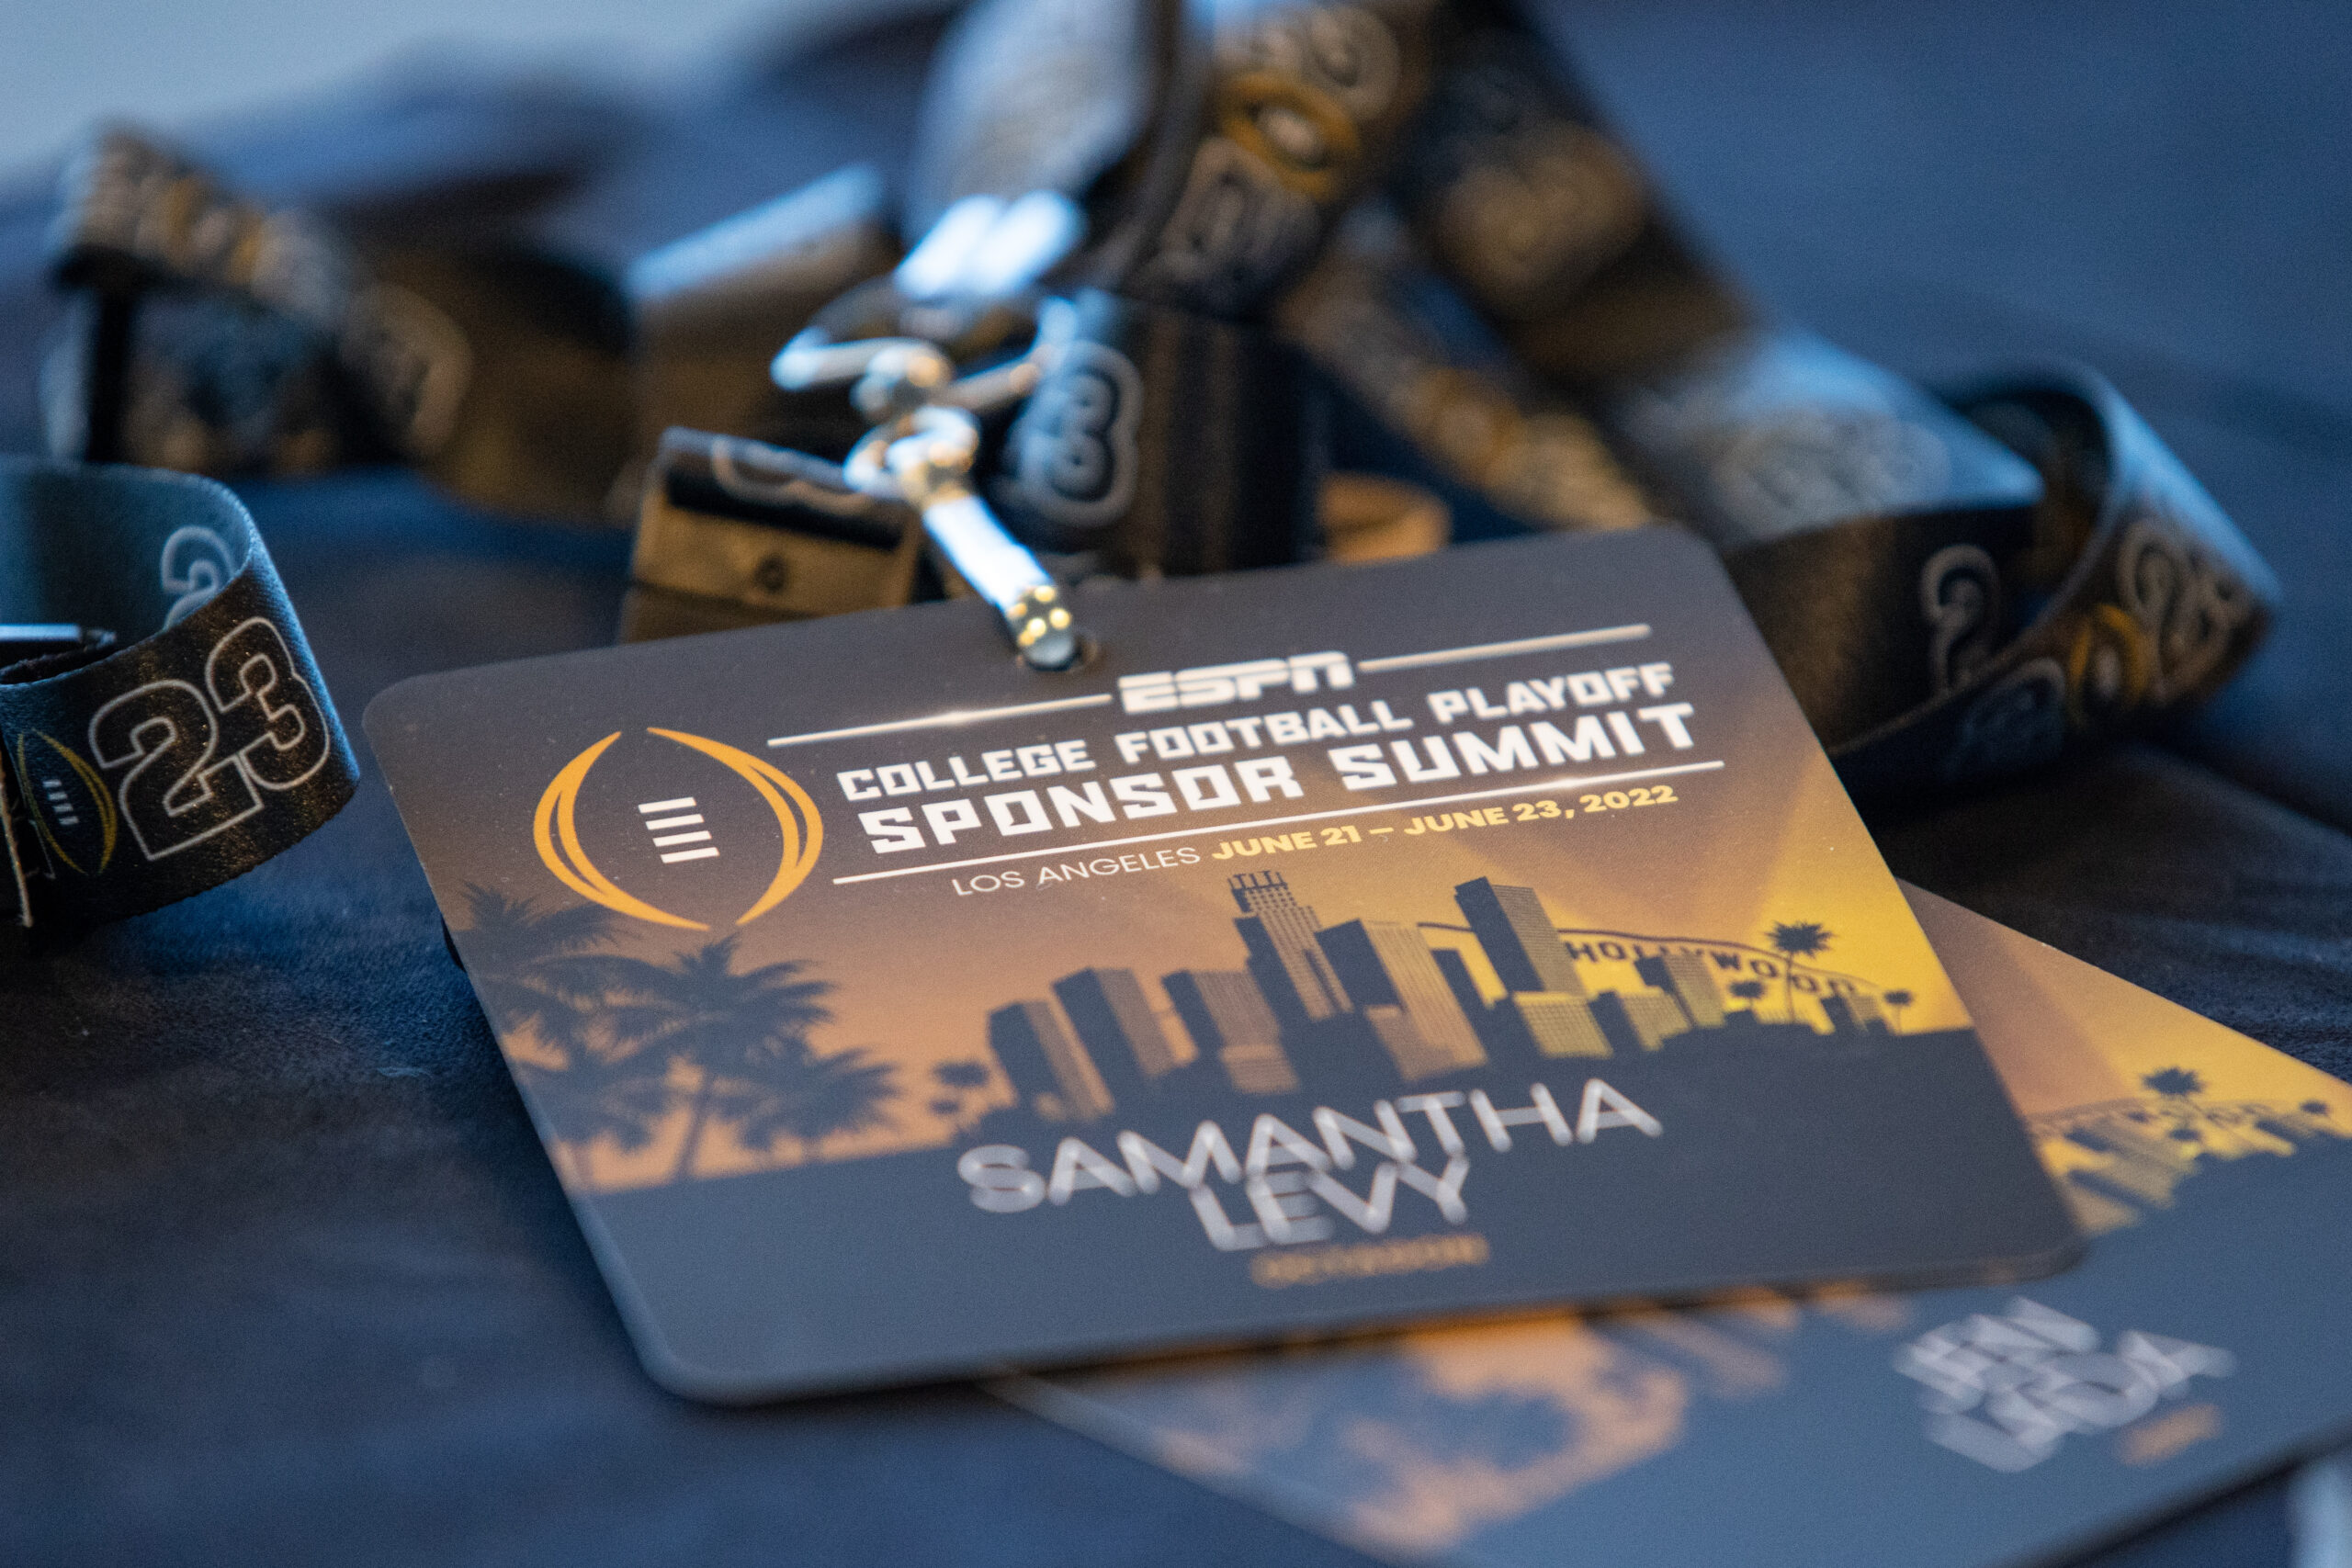 Los Angeles, CA - June 22, 2022 - JW Marriott: Credentials provided at the 2022 College Football Playoff Sponsor Summit Breakfast and Check-In.(Photo by Melina Pizano / ESPN Images)